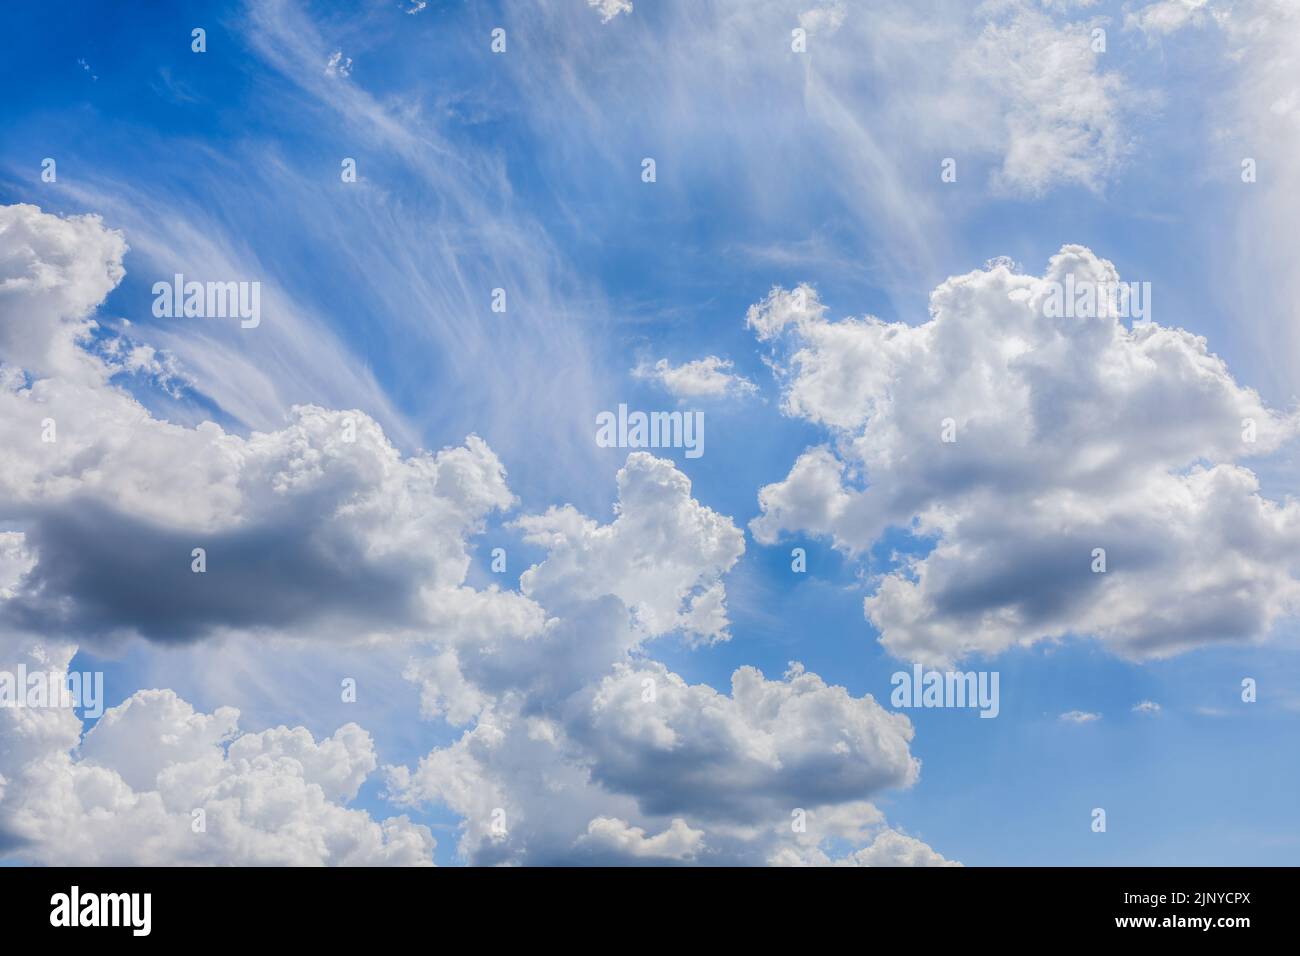 White fluffy cloud against a blue sky. Stock Photo